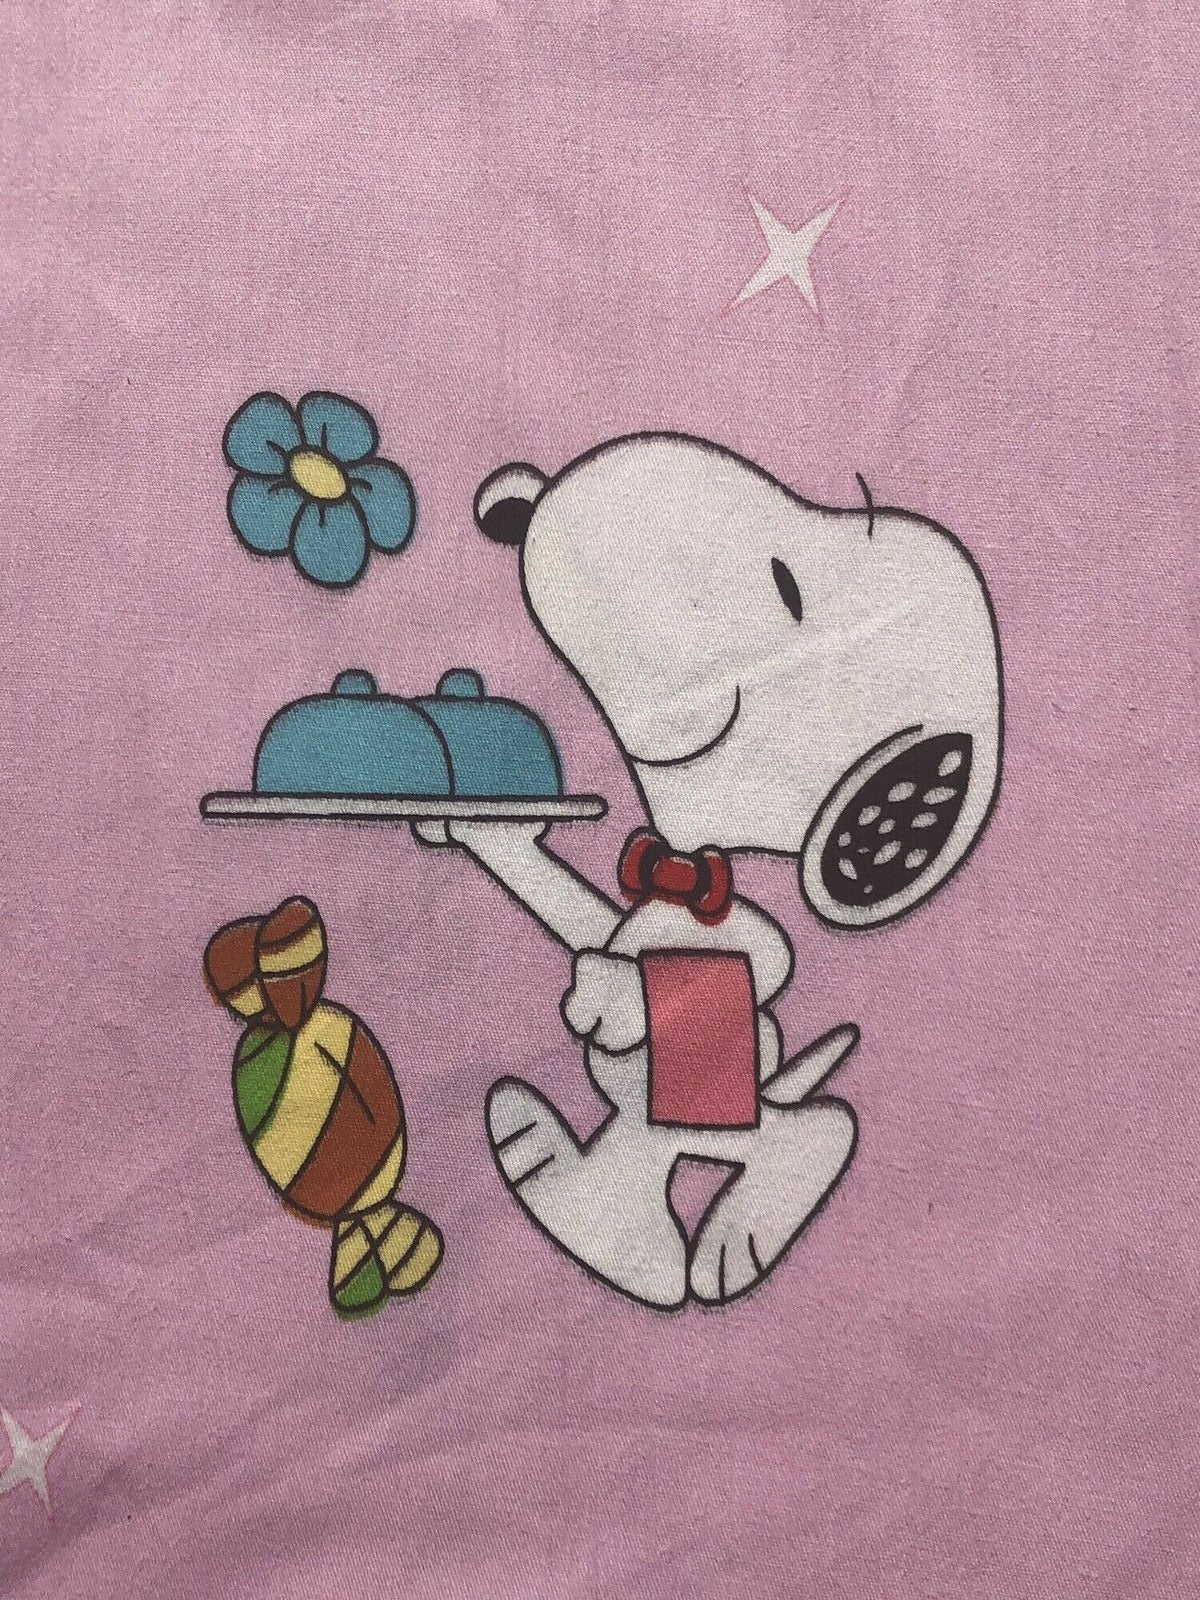 Peanuts Snoopy, Woodstock and Friends Kids Cotton Fabric